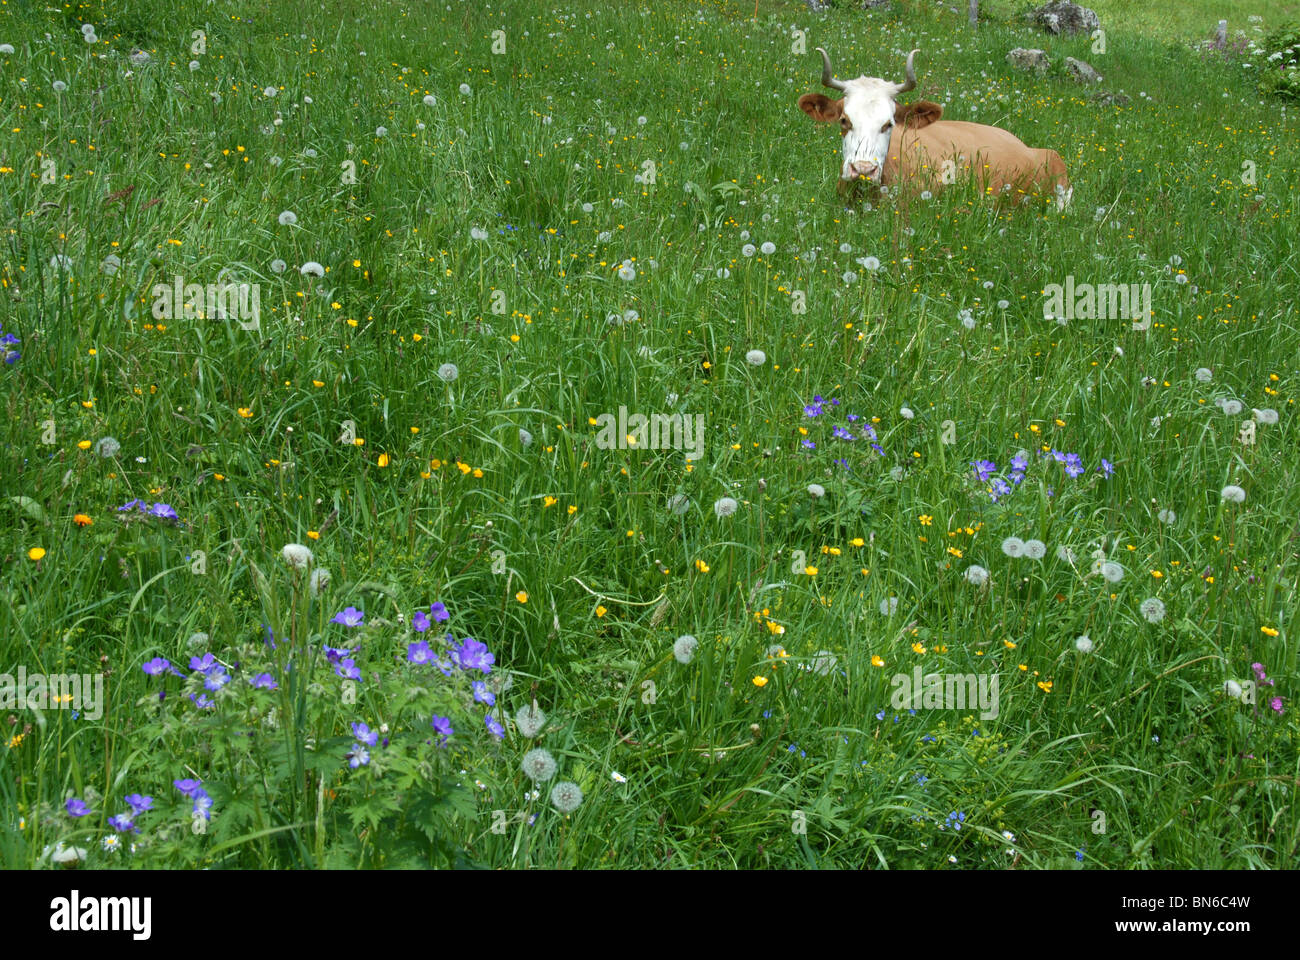 Dairy cow laying in tall gras with flowers, Berense alps, Swtzerland Stock Photo